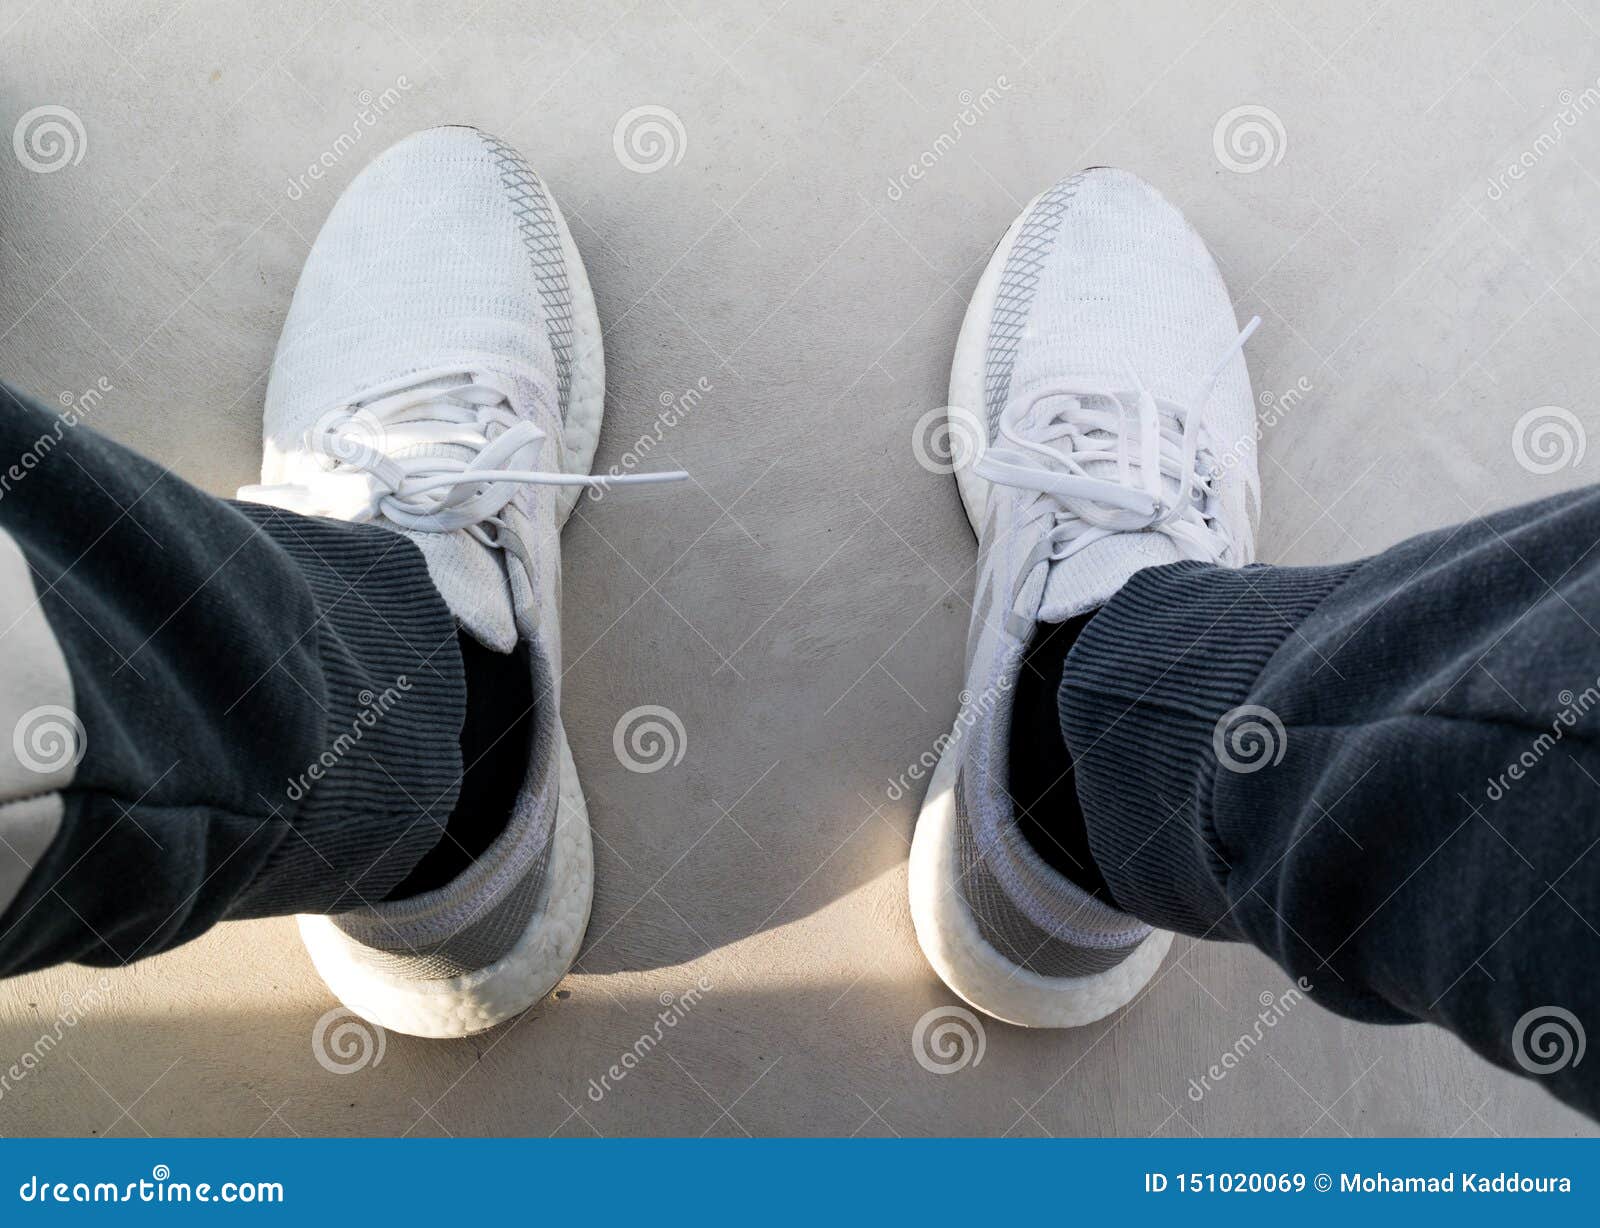 Eentonig Visa Rijp A Man Wearing Sneakers, ADIDAS ULTRA BOOST, White and Gray Shoes Editorial  Stock Image - Image of product, black: 151020069